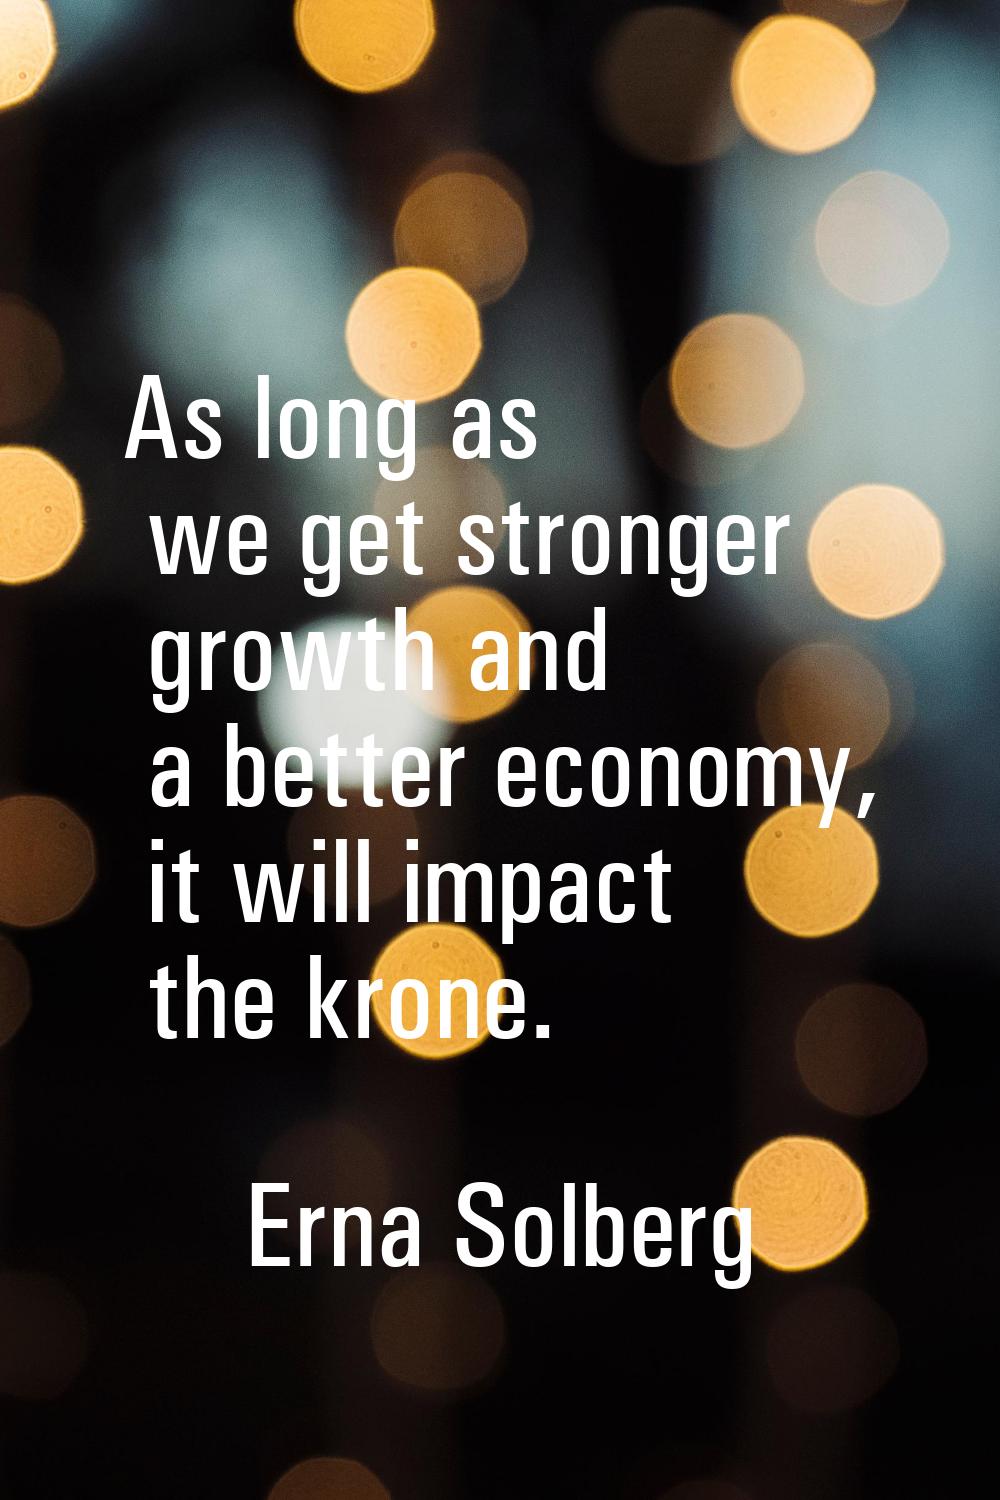 As long as we get stronger growth and a better economy, it will impact the krone.